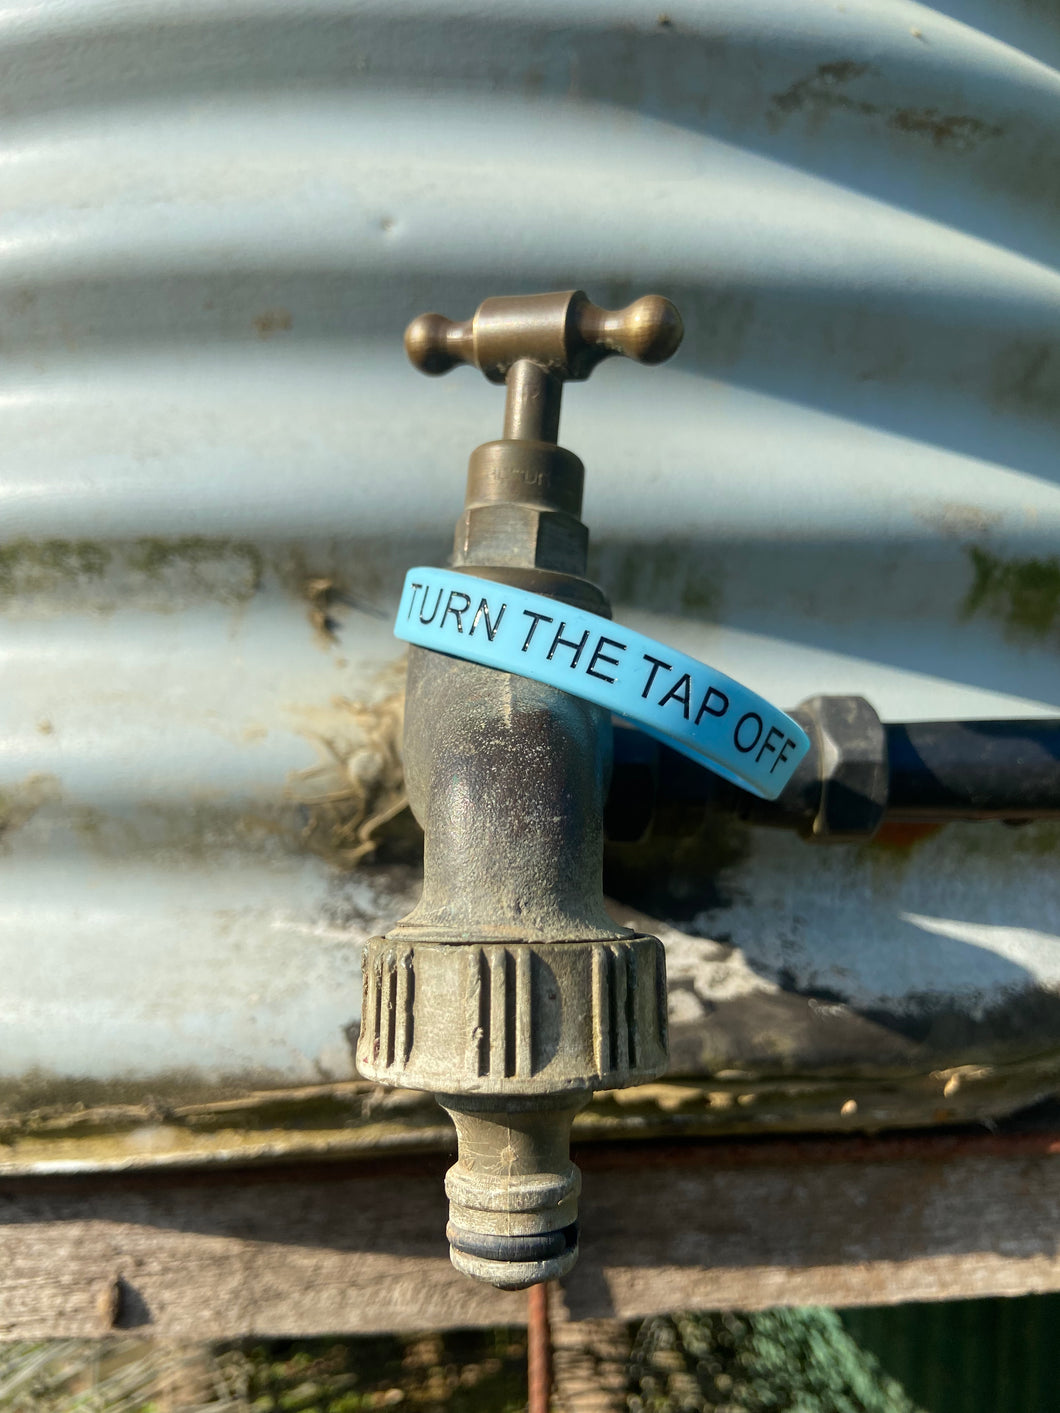 Turn the tap off - Silicon wrist band